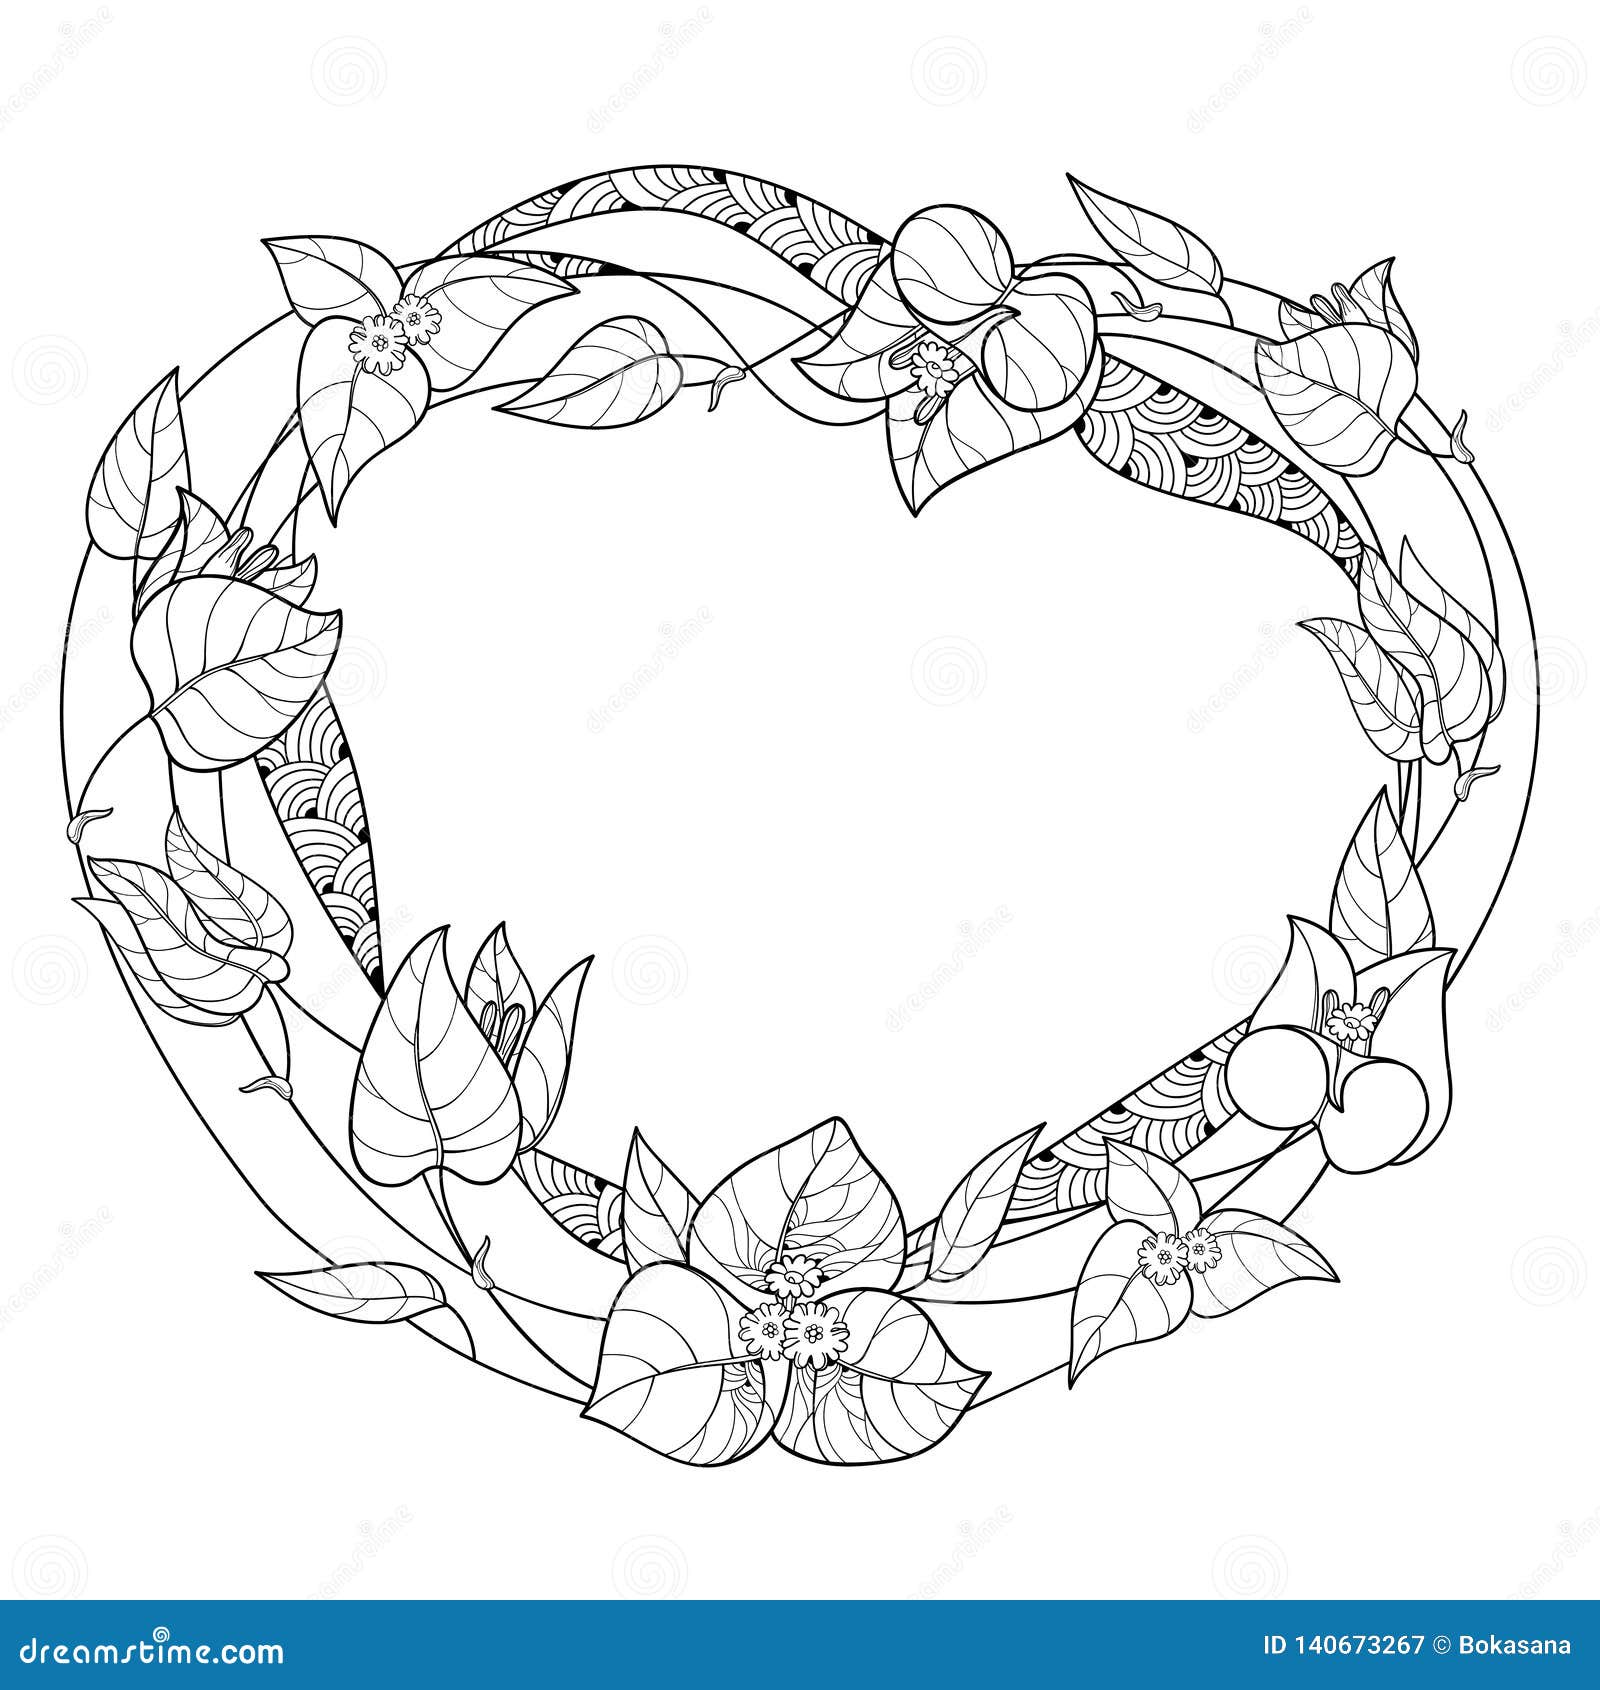  round wreath of outline bougainvillea or buganvilla flower, bud and leaf in black  on white background.